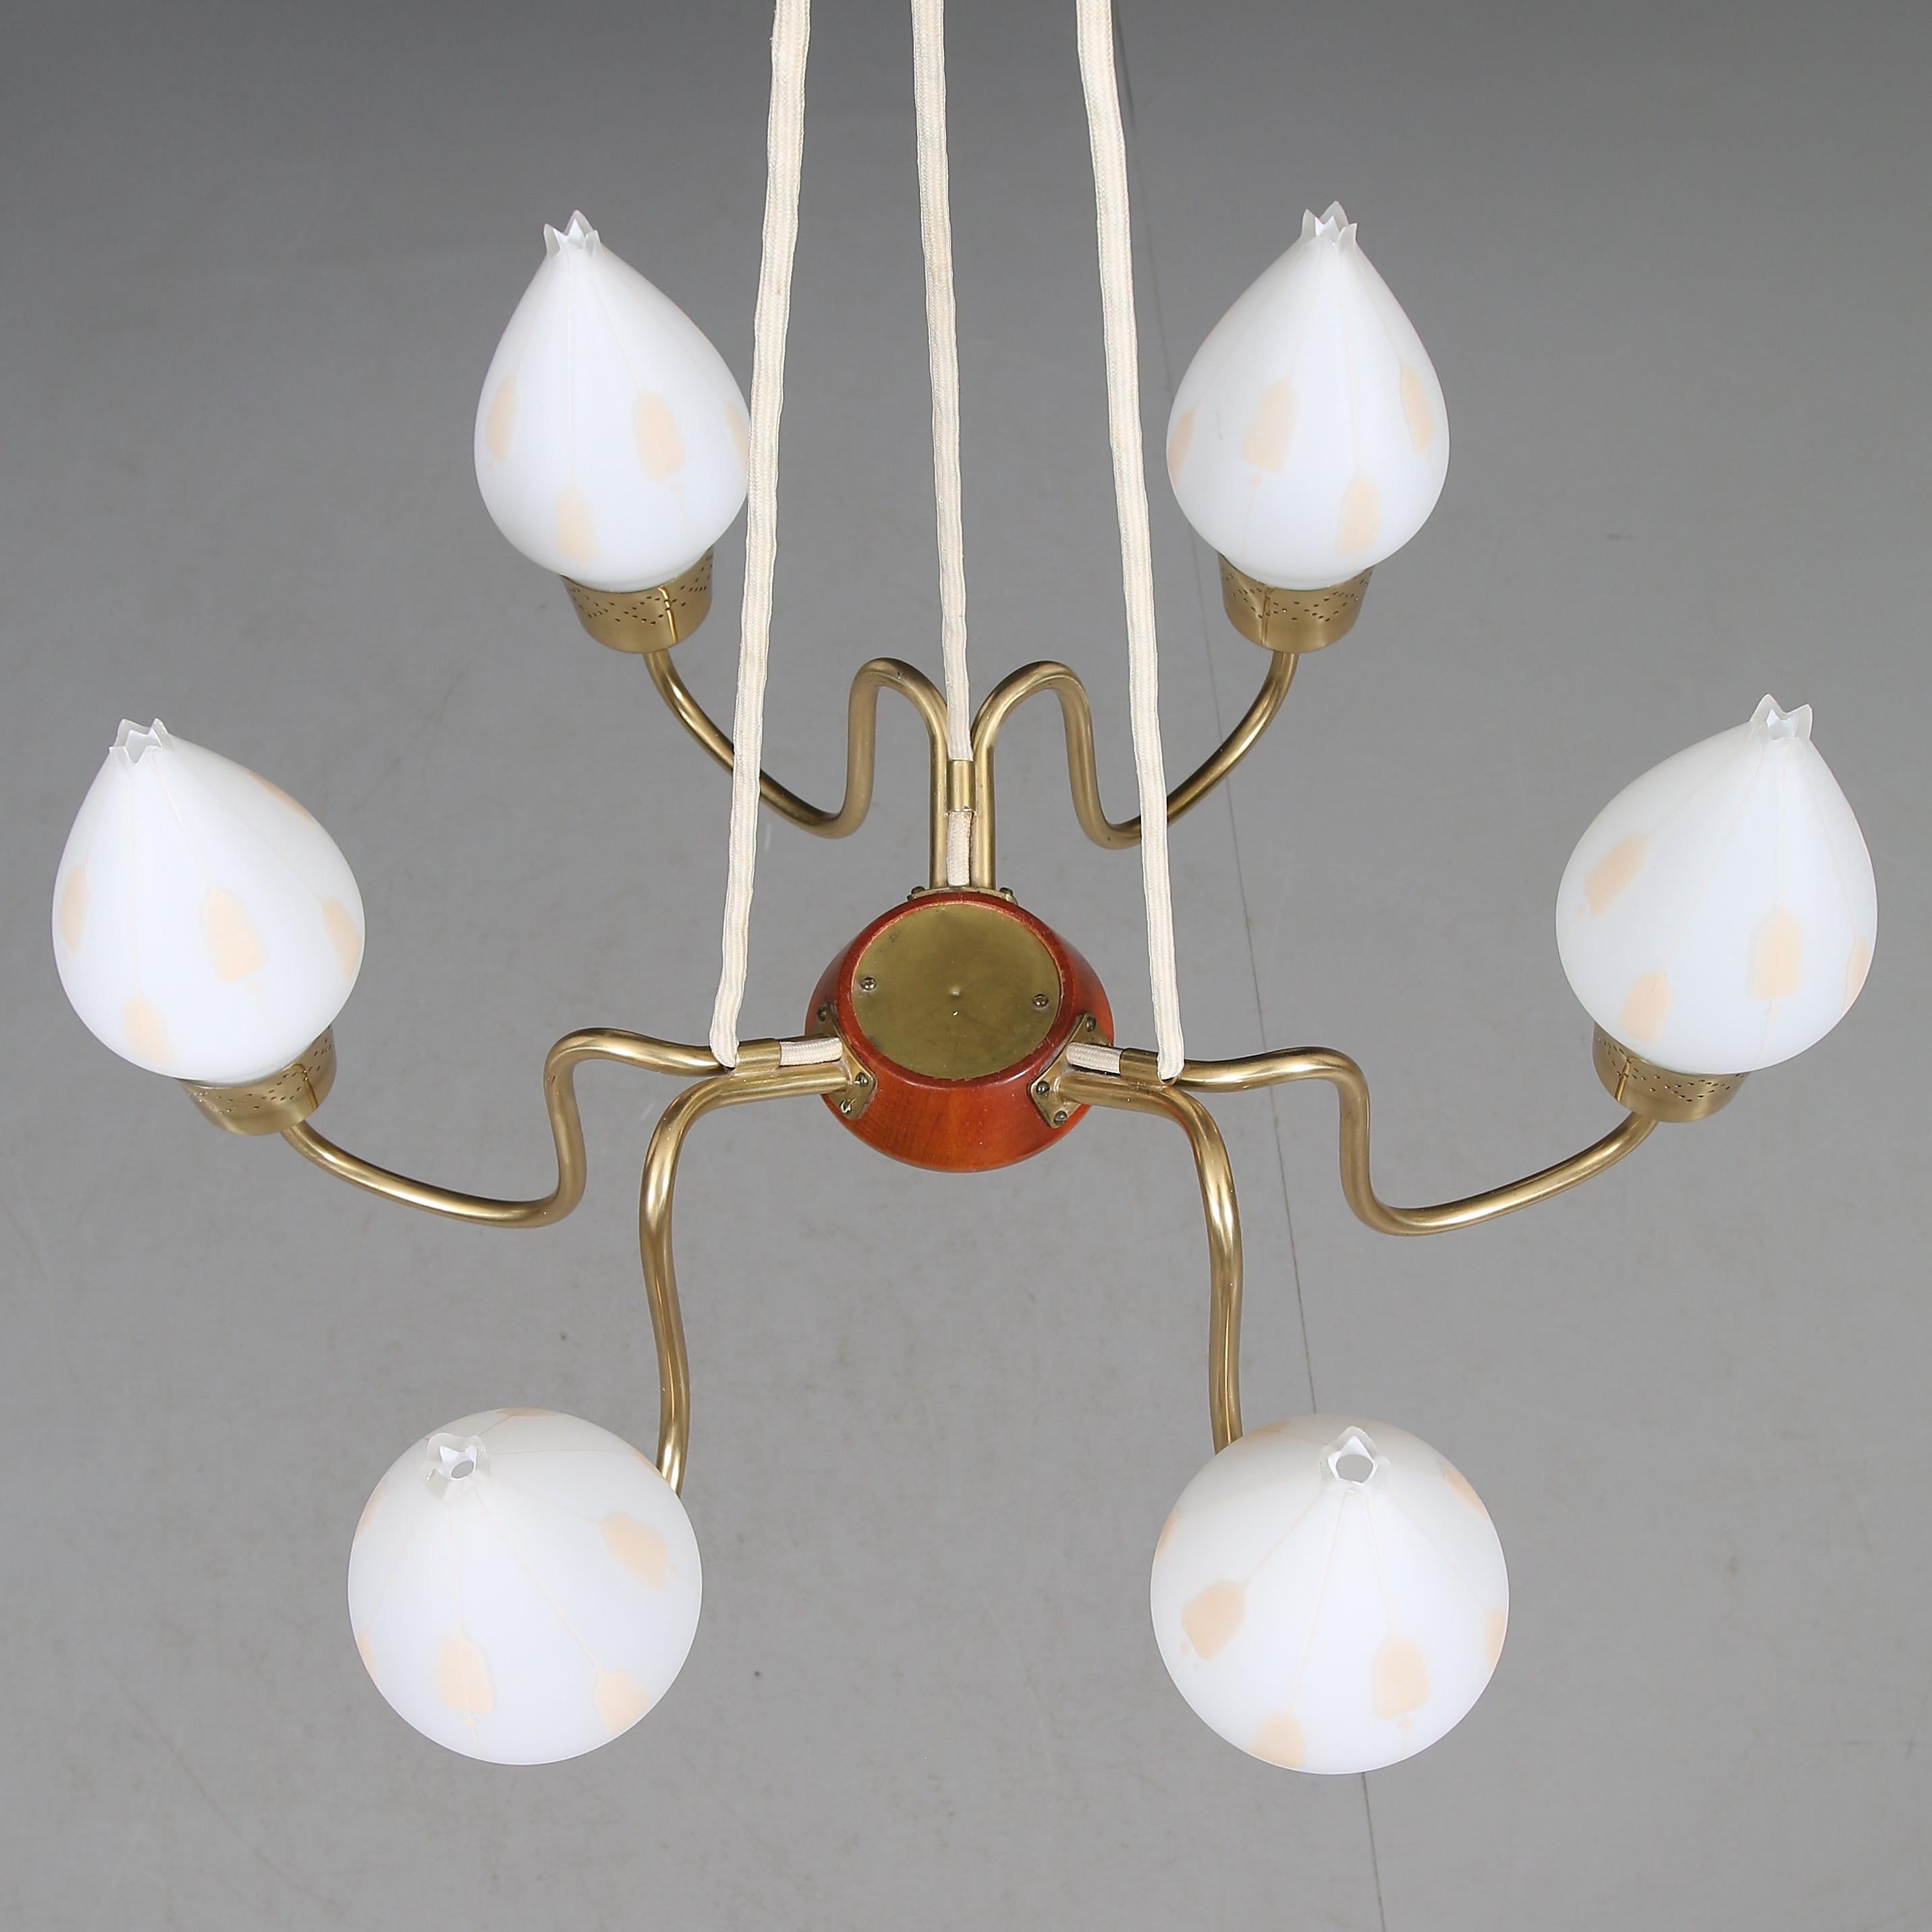 Fog & Mørup Brass Chandelier with Opaline Glass Shades In Good Condition For Sale In Vienna, AT